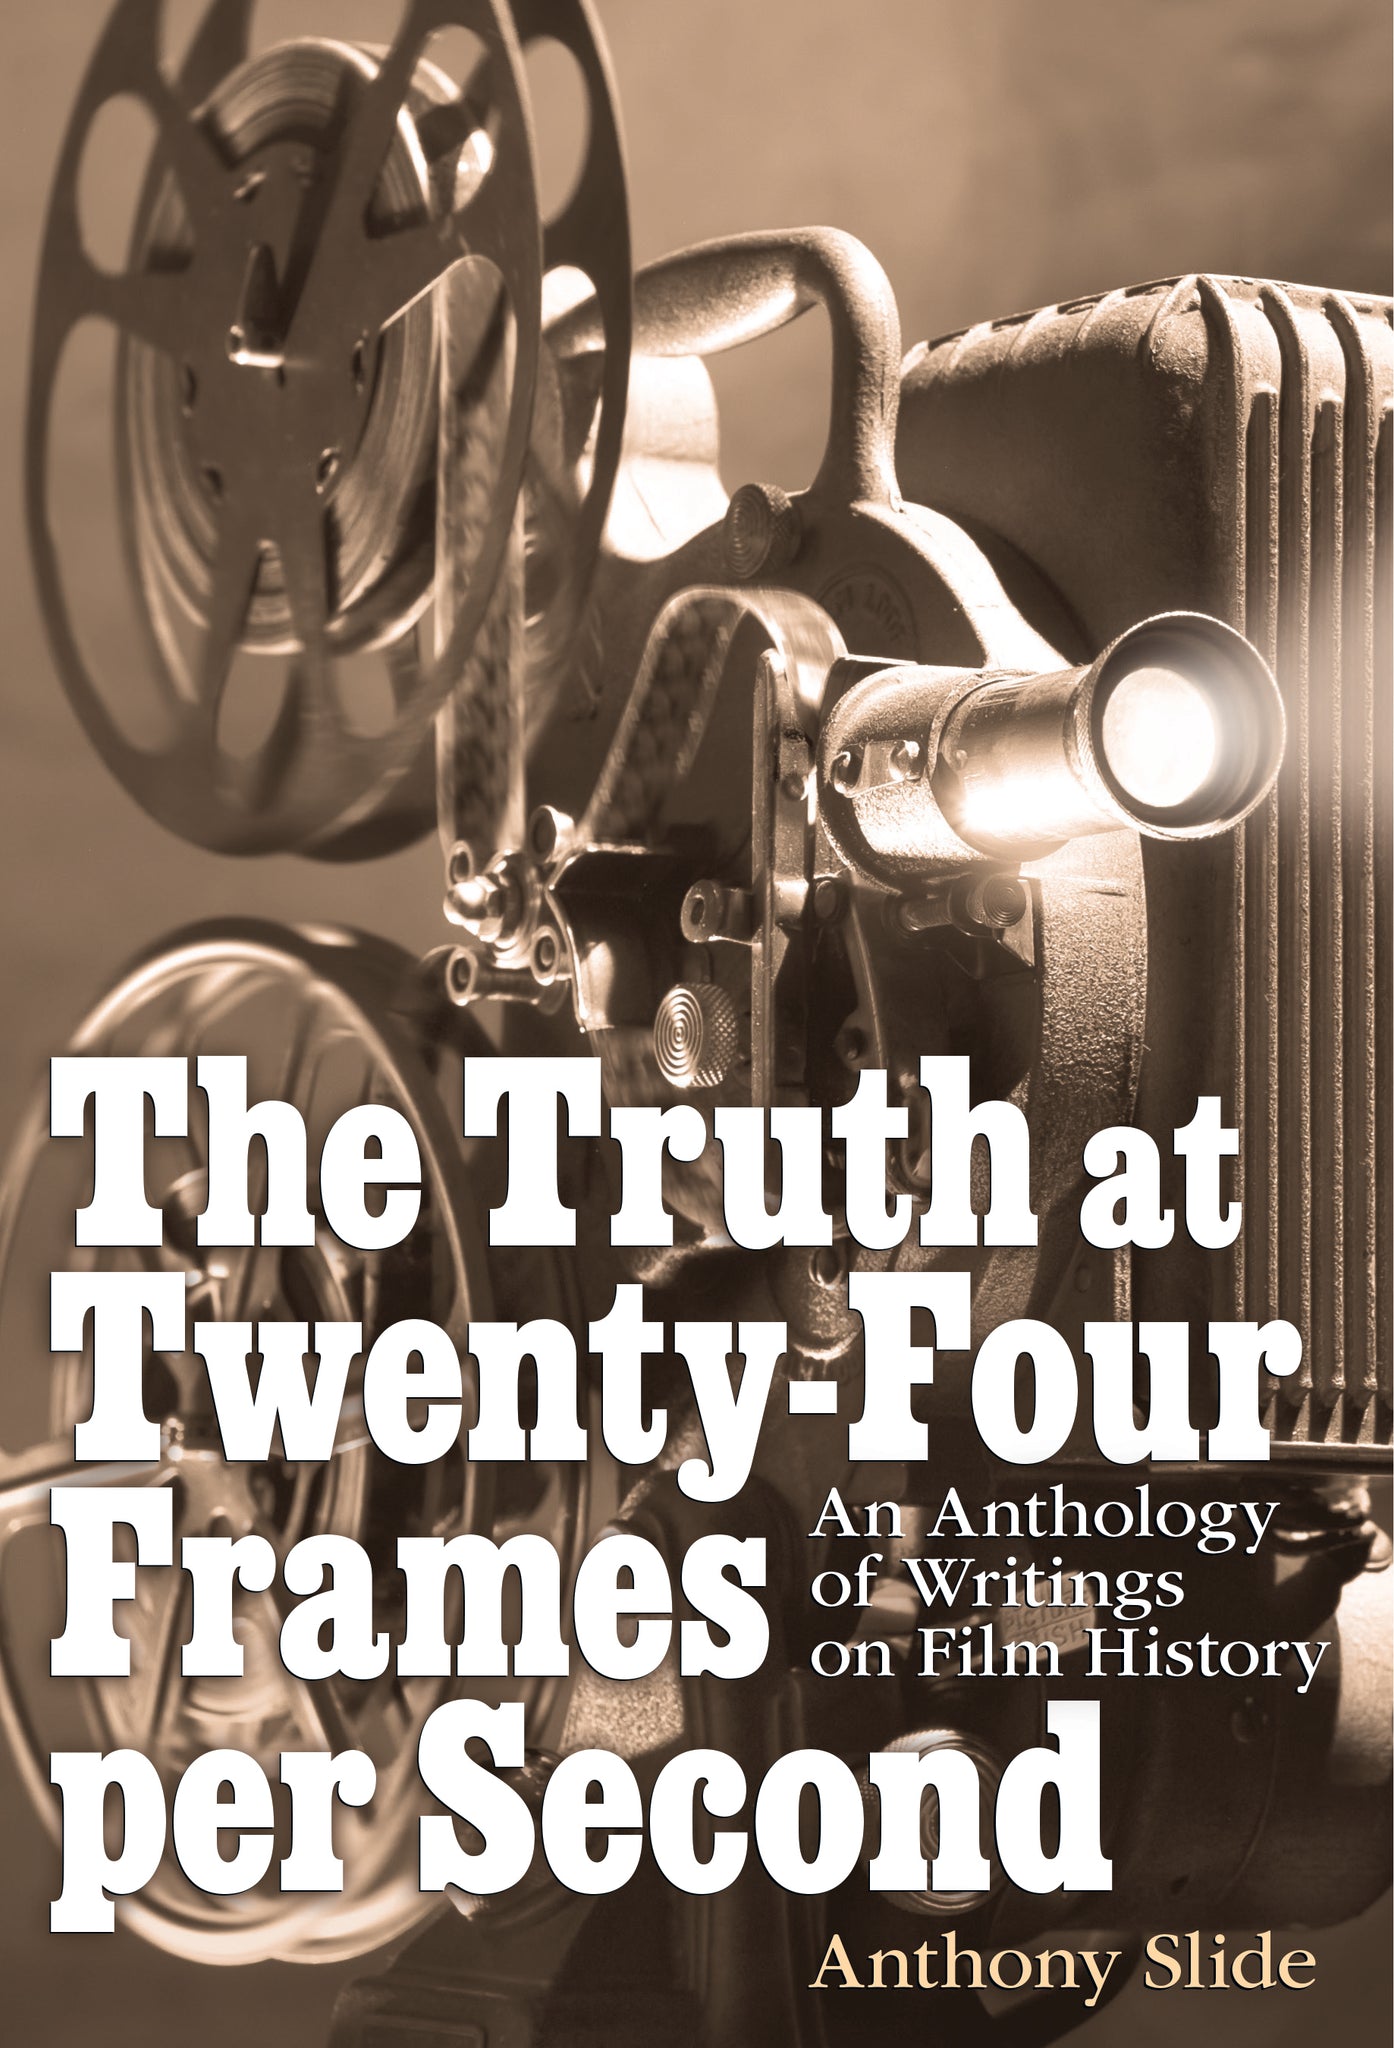 The Truth at Twenty-Four Frames per Second: An Anthology of Writings on Film History (hardback)